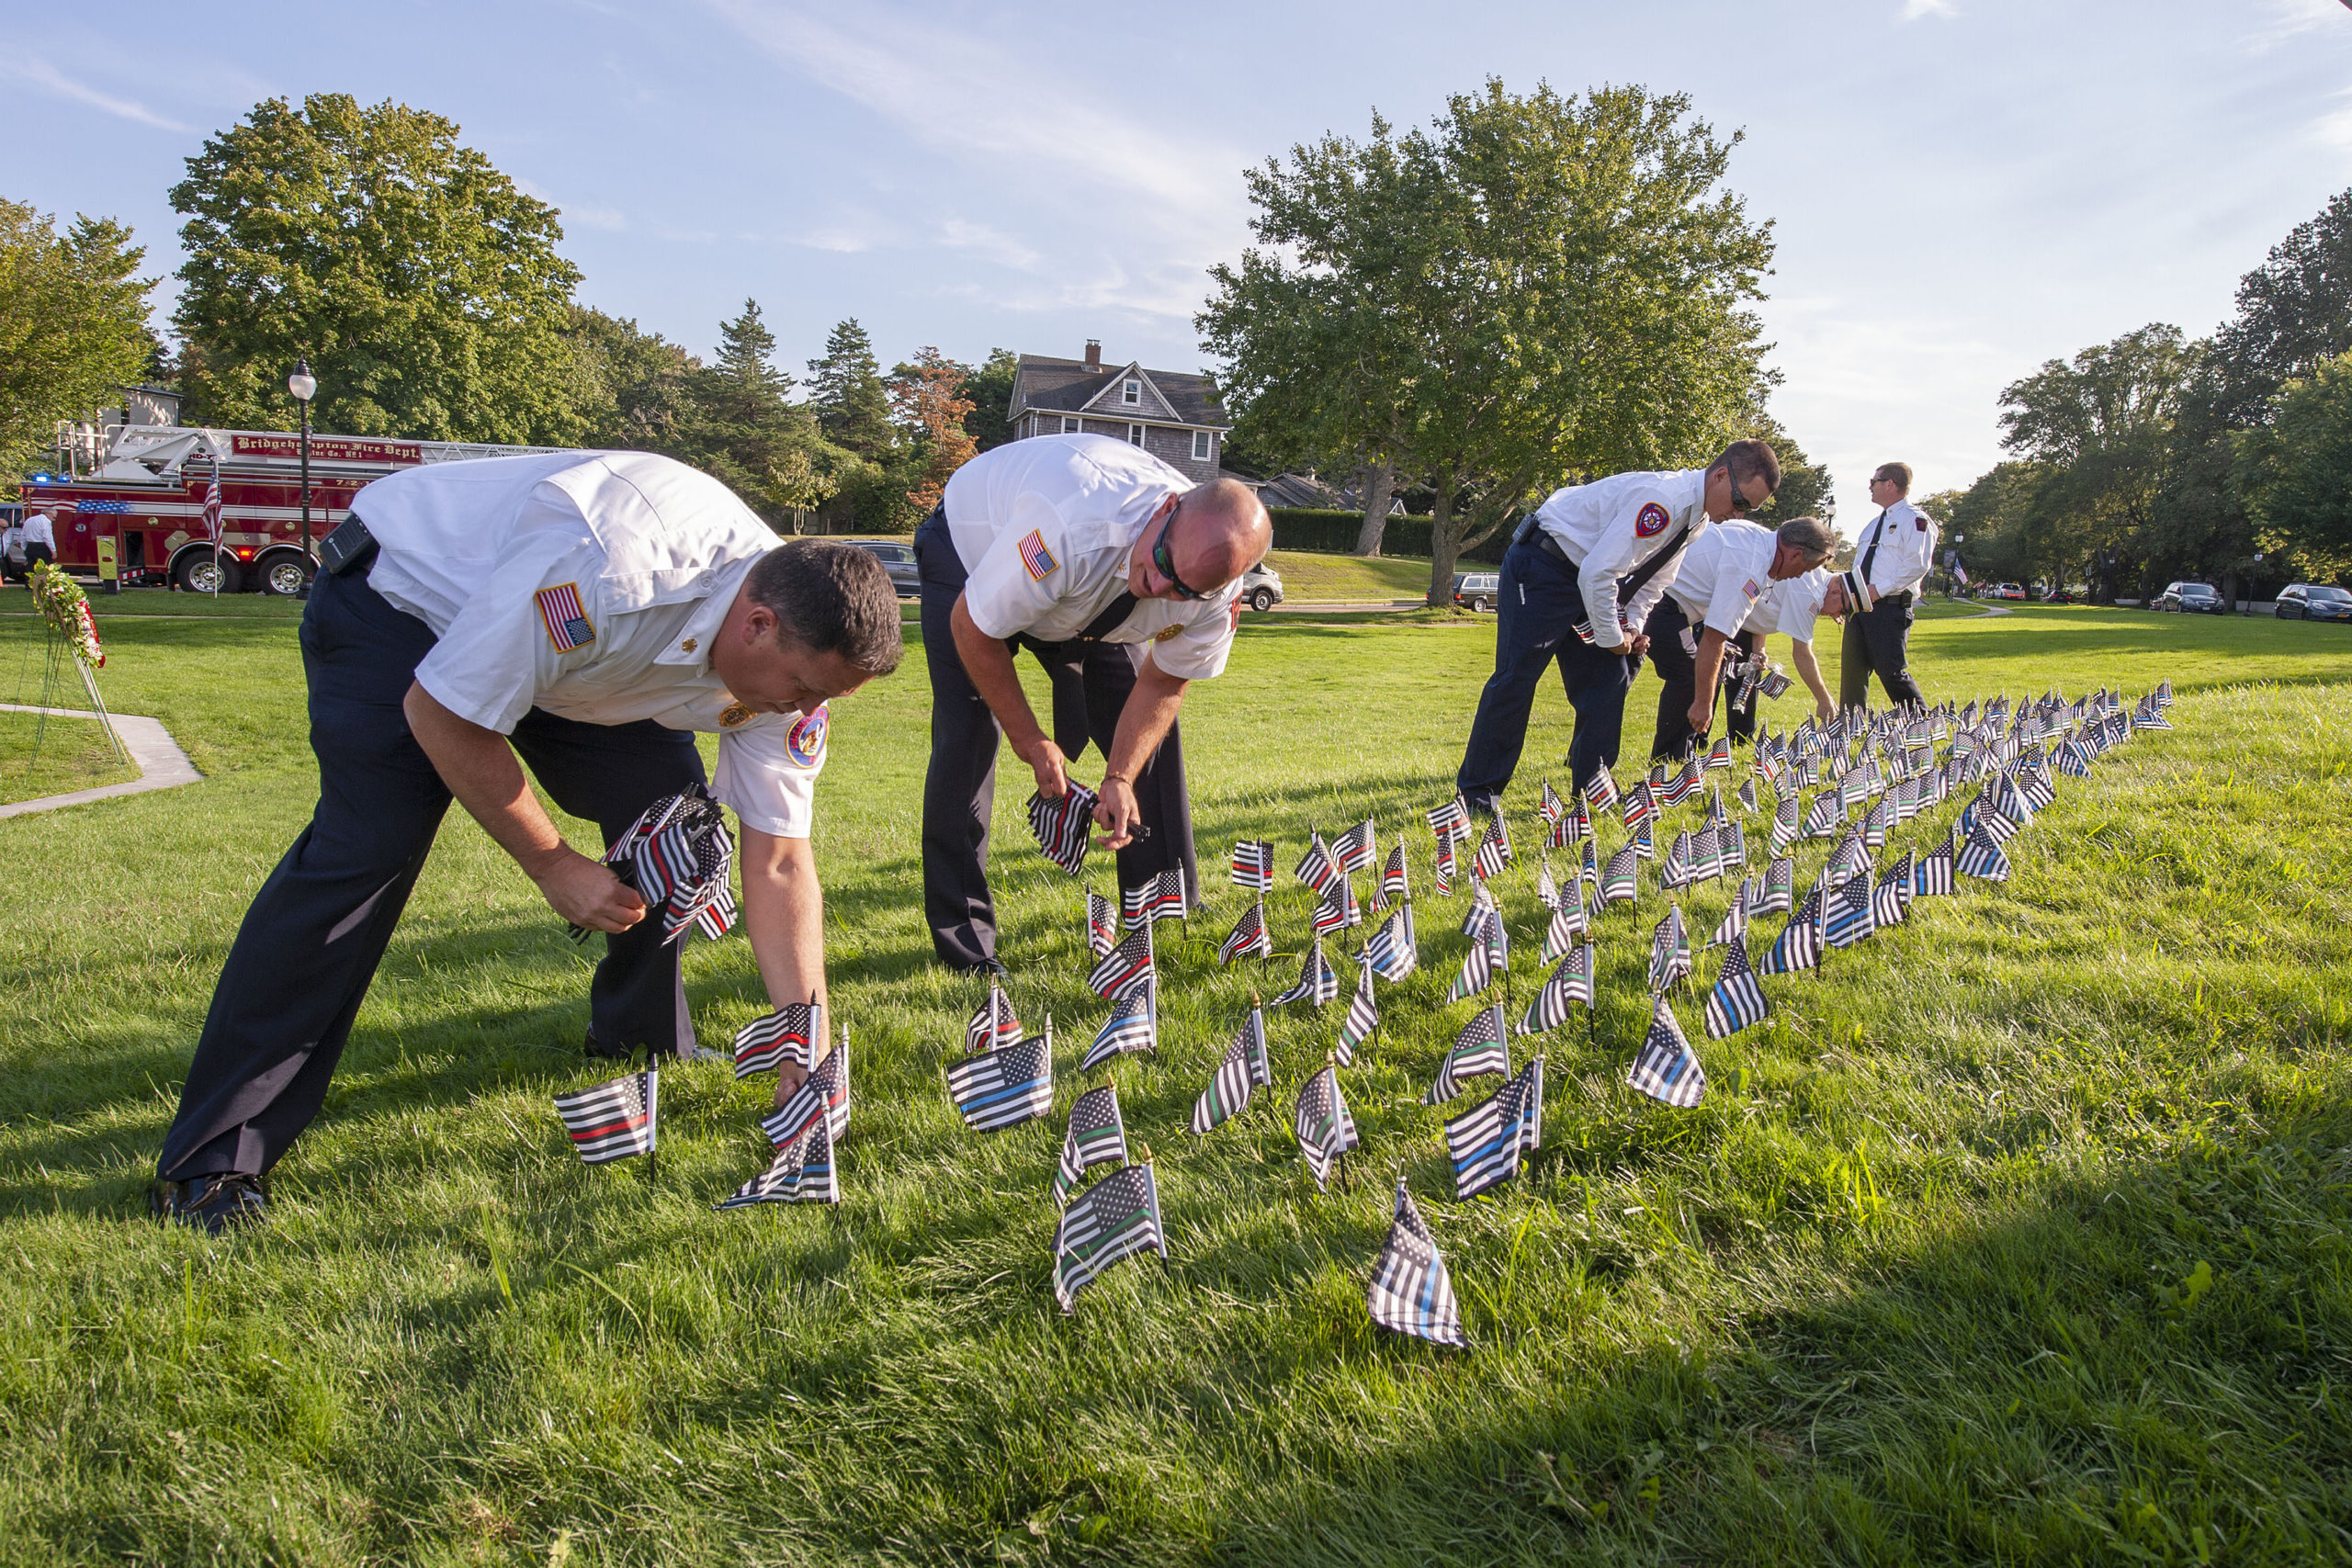 Firefighters from the Amagansett, Springs and Sag Harbor Fire Departments plant flags - one for each fire, police or military member killed at 9/11 - prior to the start of the ceremony commemorating the 20th anniversary of the attack on the World Trade Center, held on the Village Green in East Hampton on Saturday afternoon.